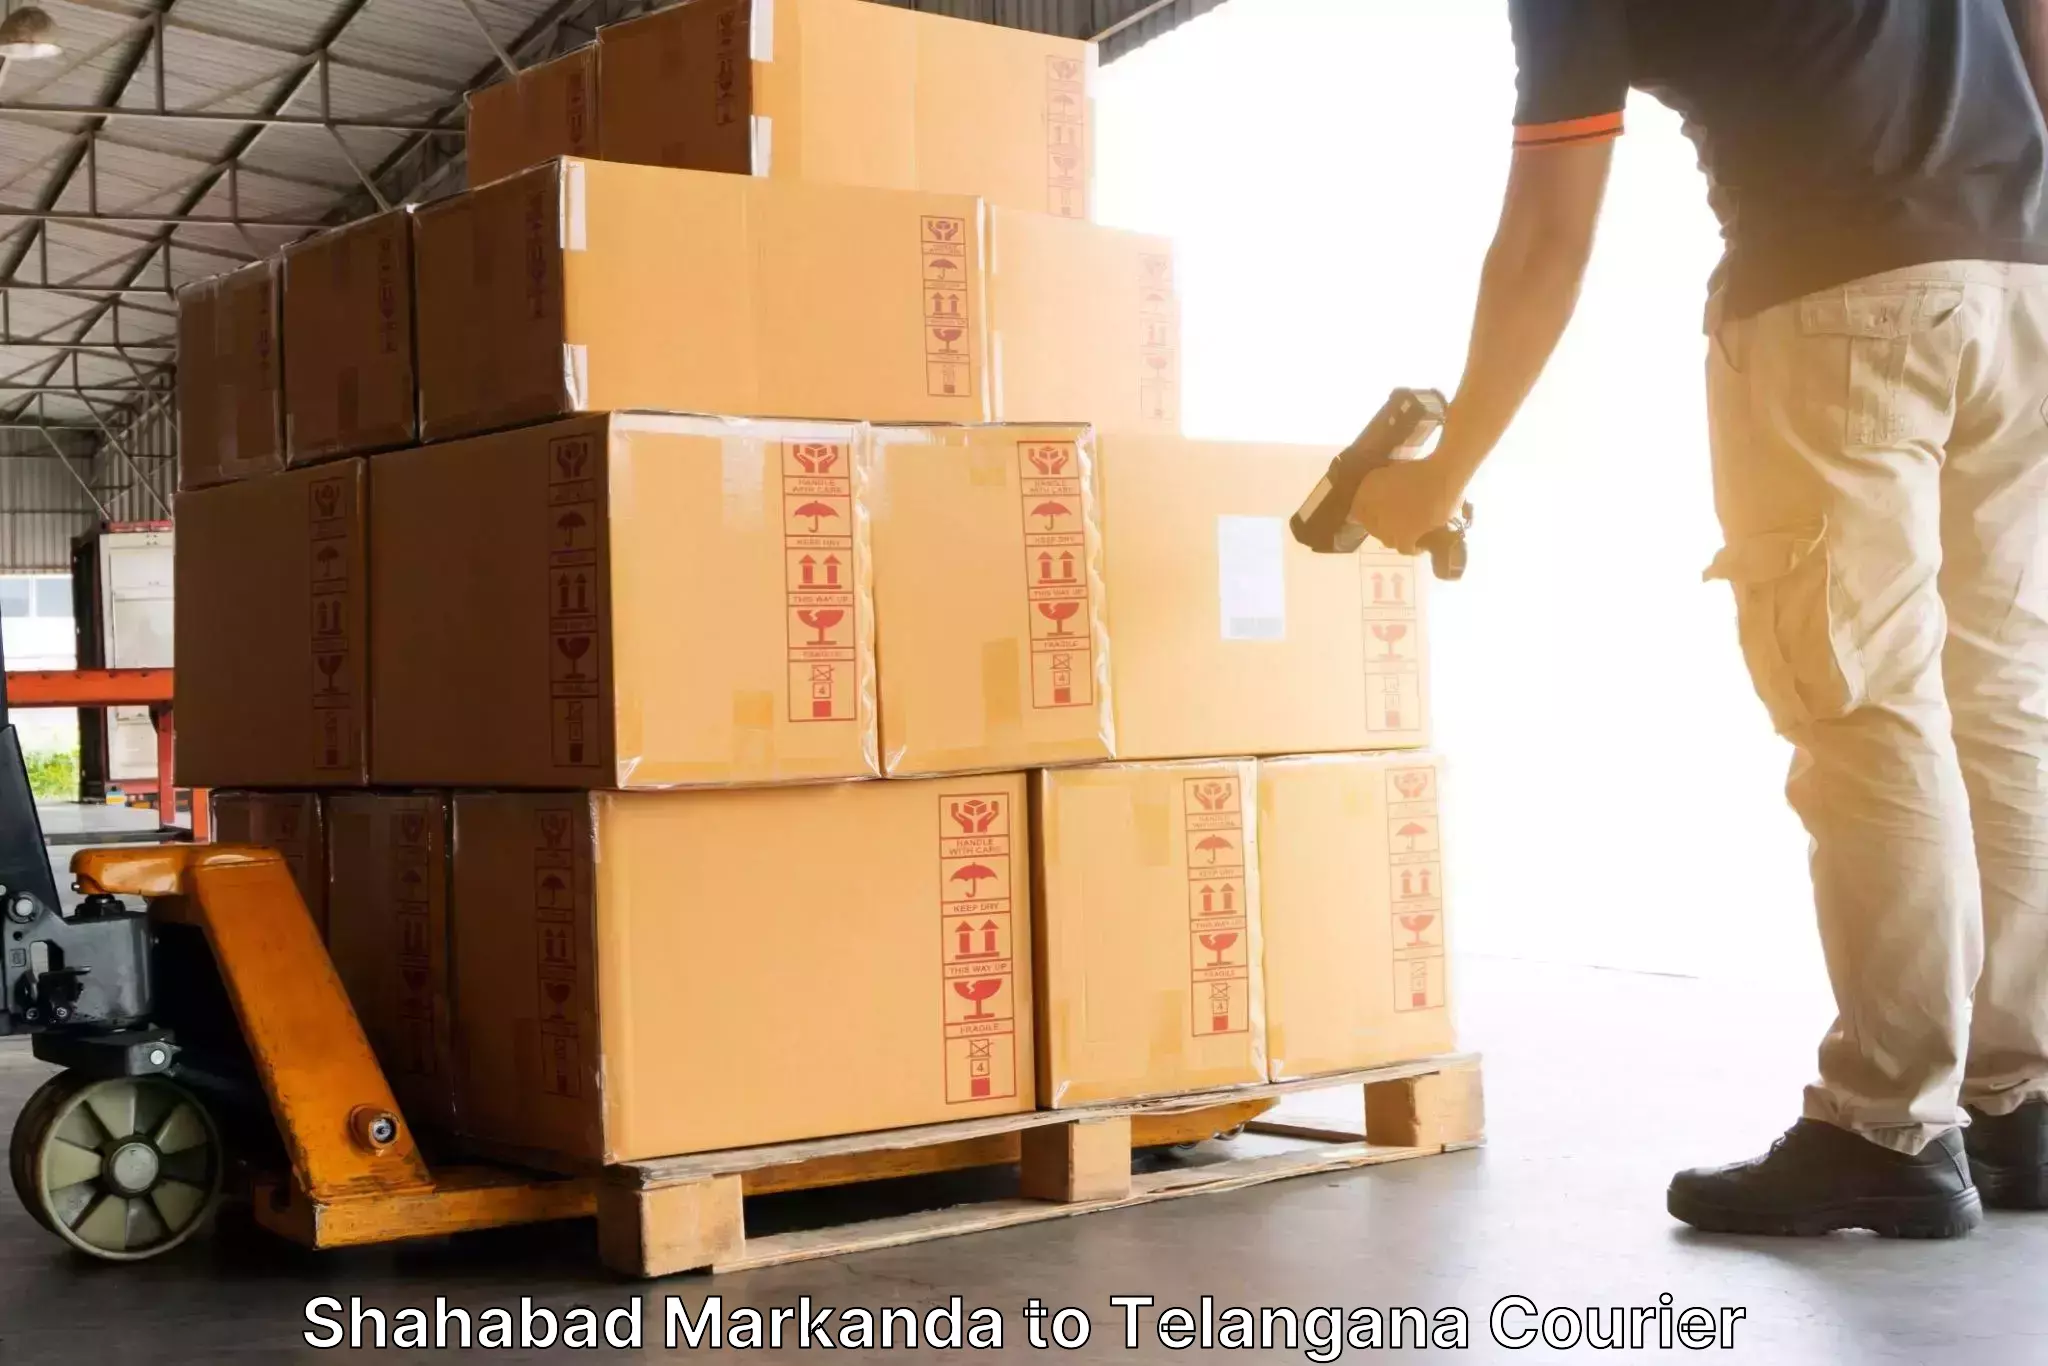 Courier rate comparison Shahabad Markanda to Armoor